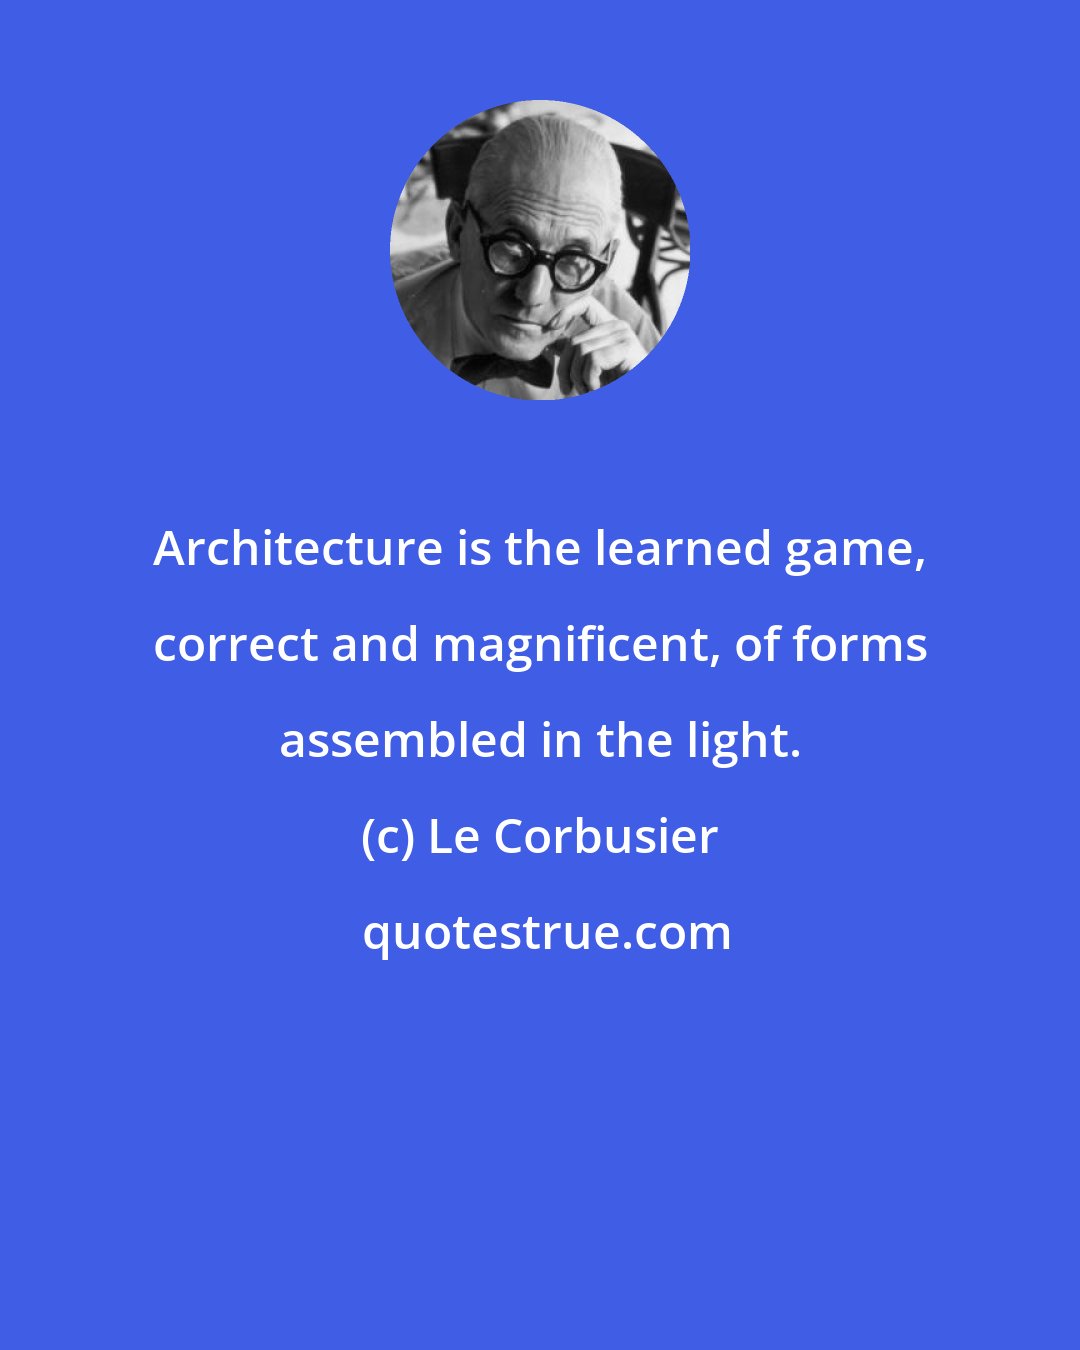 Le Corbusier: Architecture is the learned game, correct and magnificent, of forms assembled in the light.